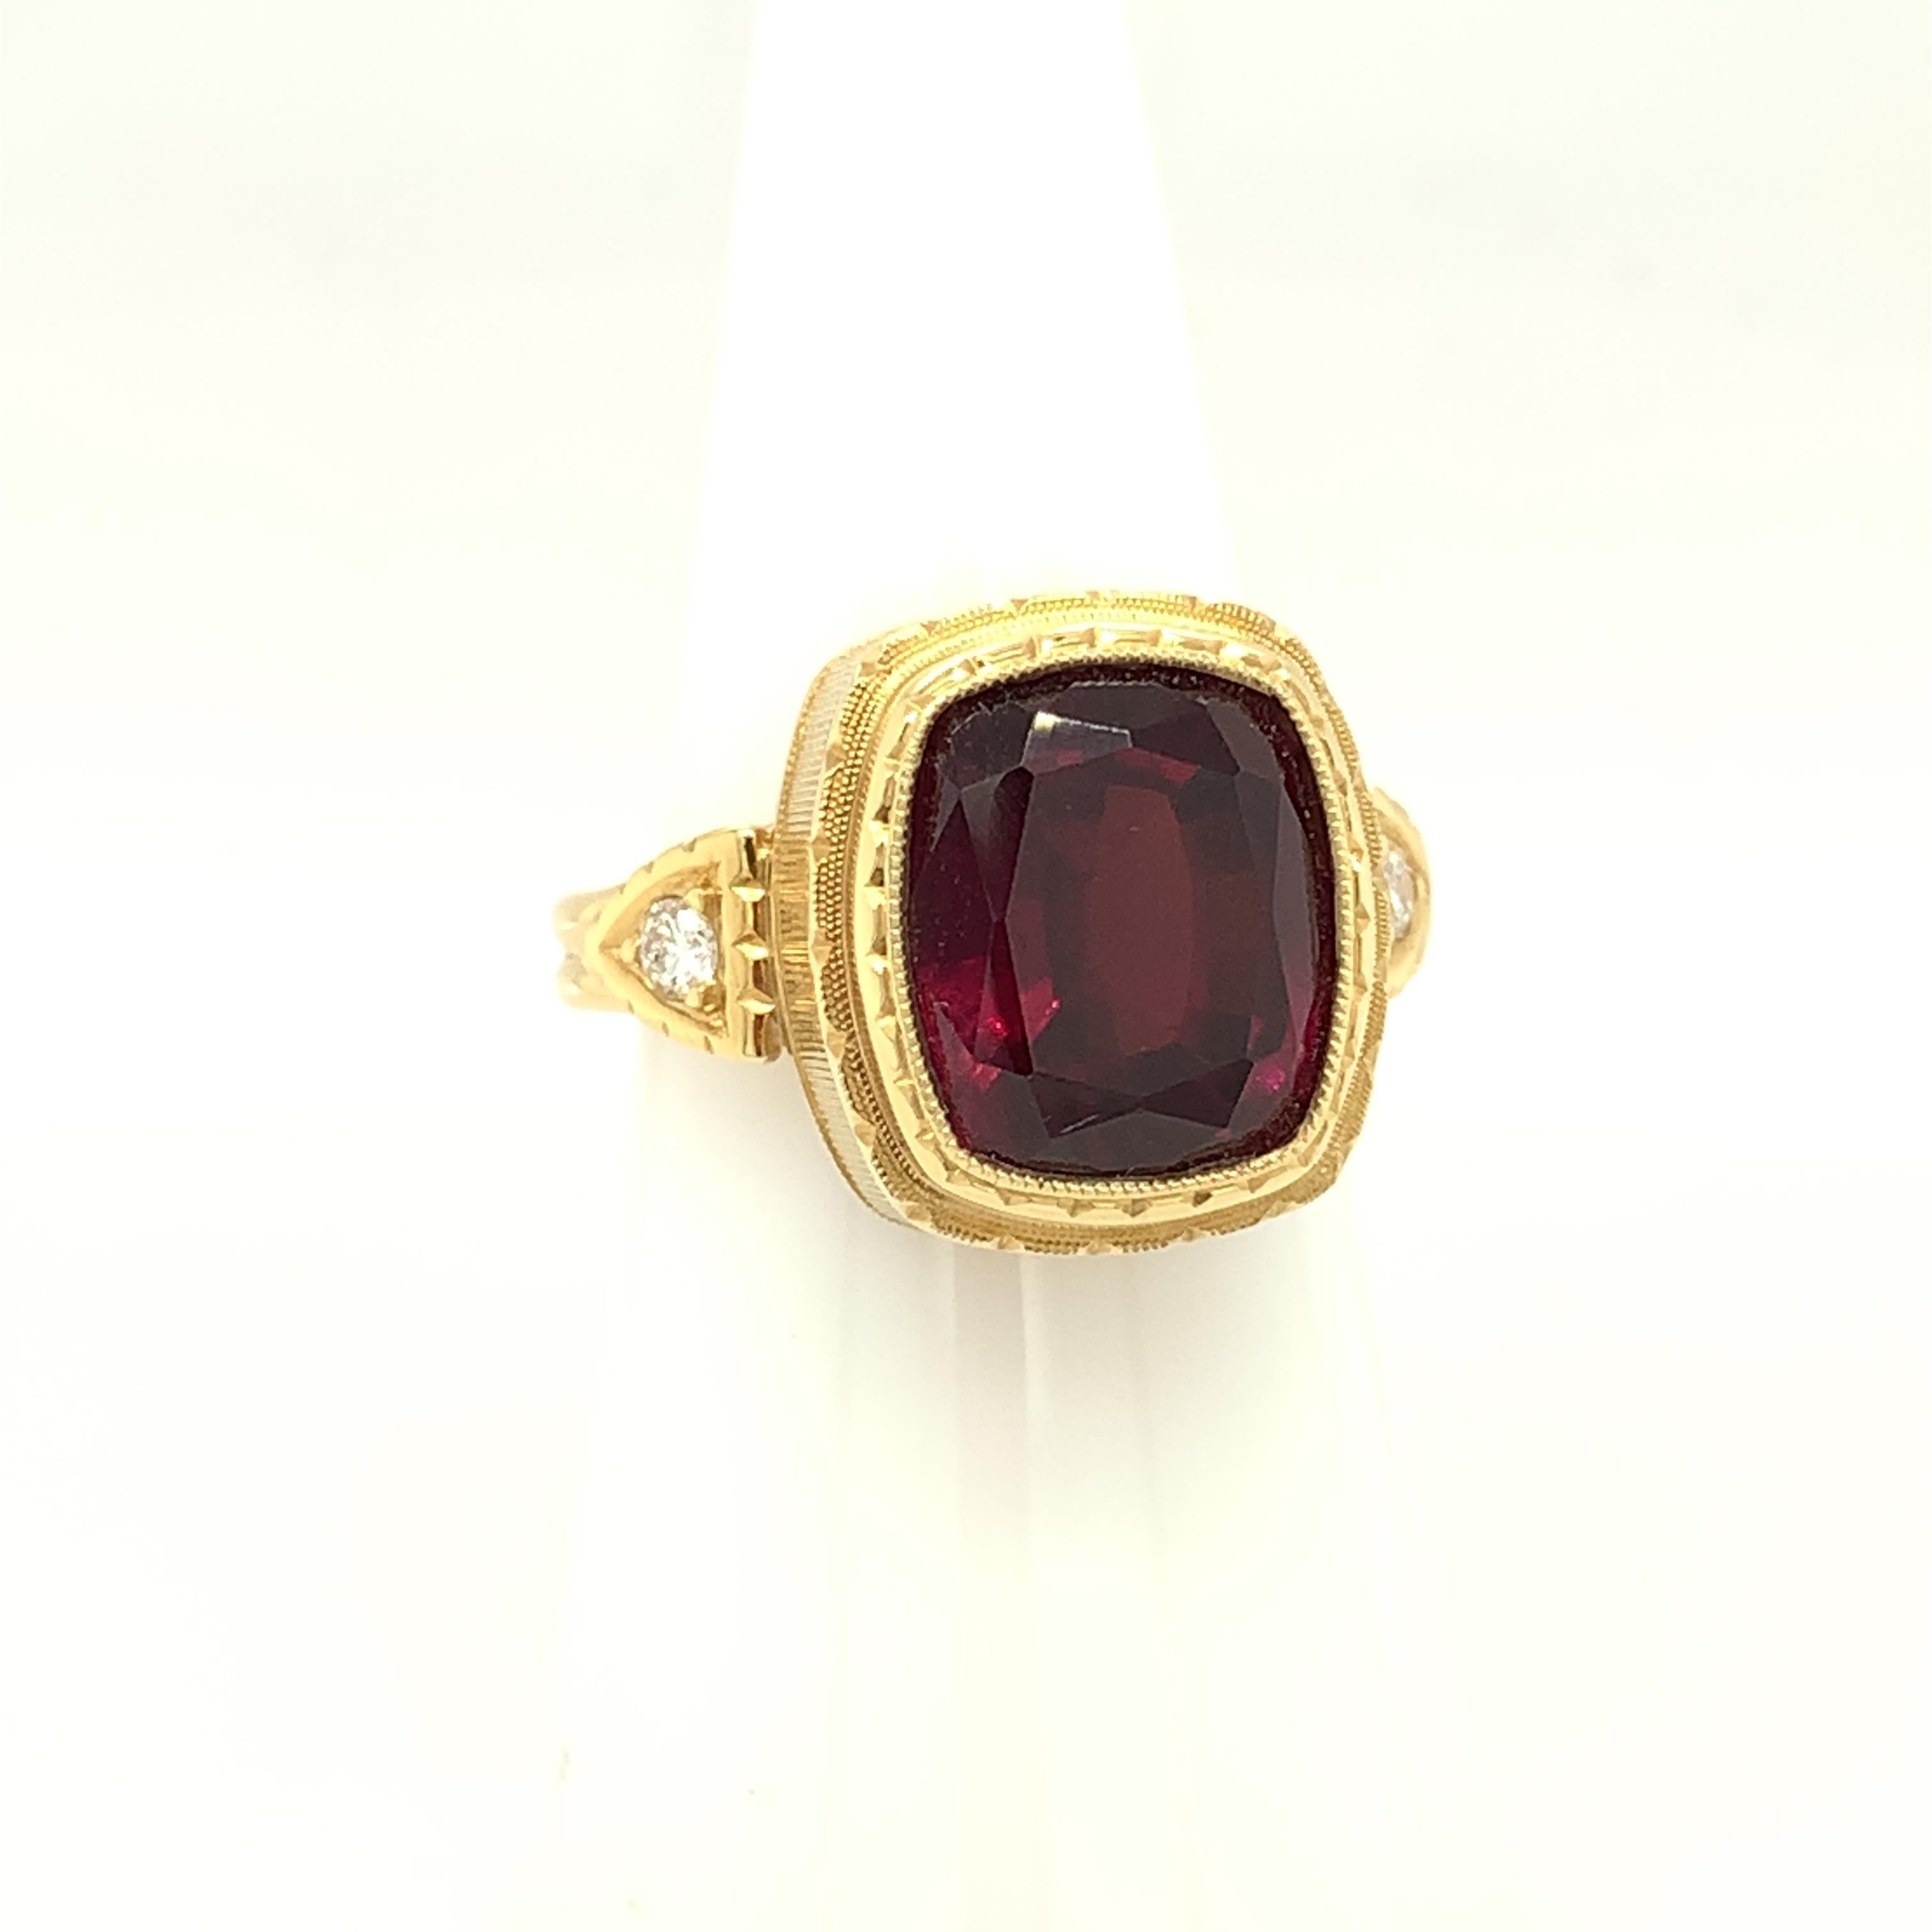 This engraved bezel ring features a 7.56 carat, rich port-wine color rhodolite garnet and sparkling diamonds in a handmade 18k yellow gold design. This setting was custom made for this fine gemstone and shows off the rhodolite's beautiful pinkish